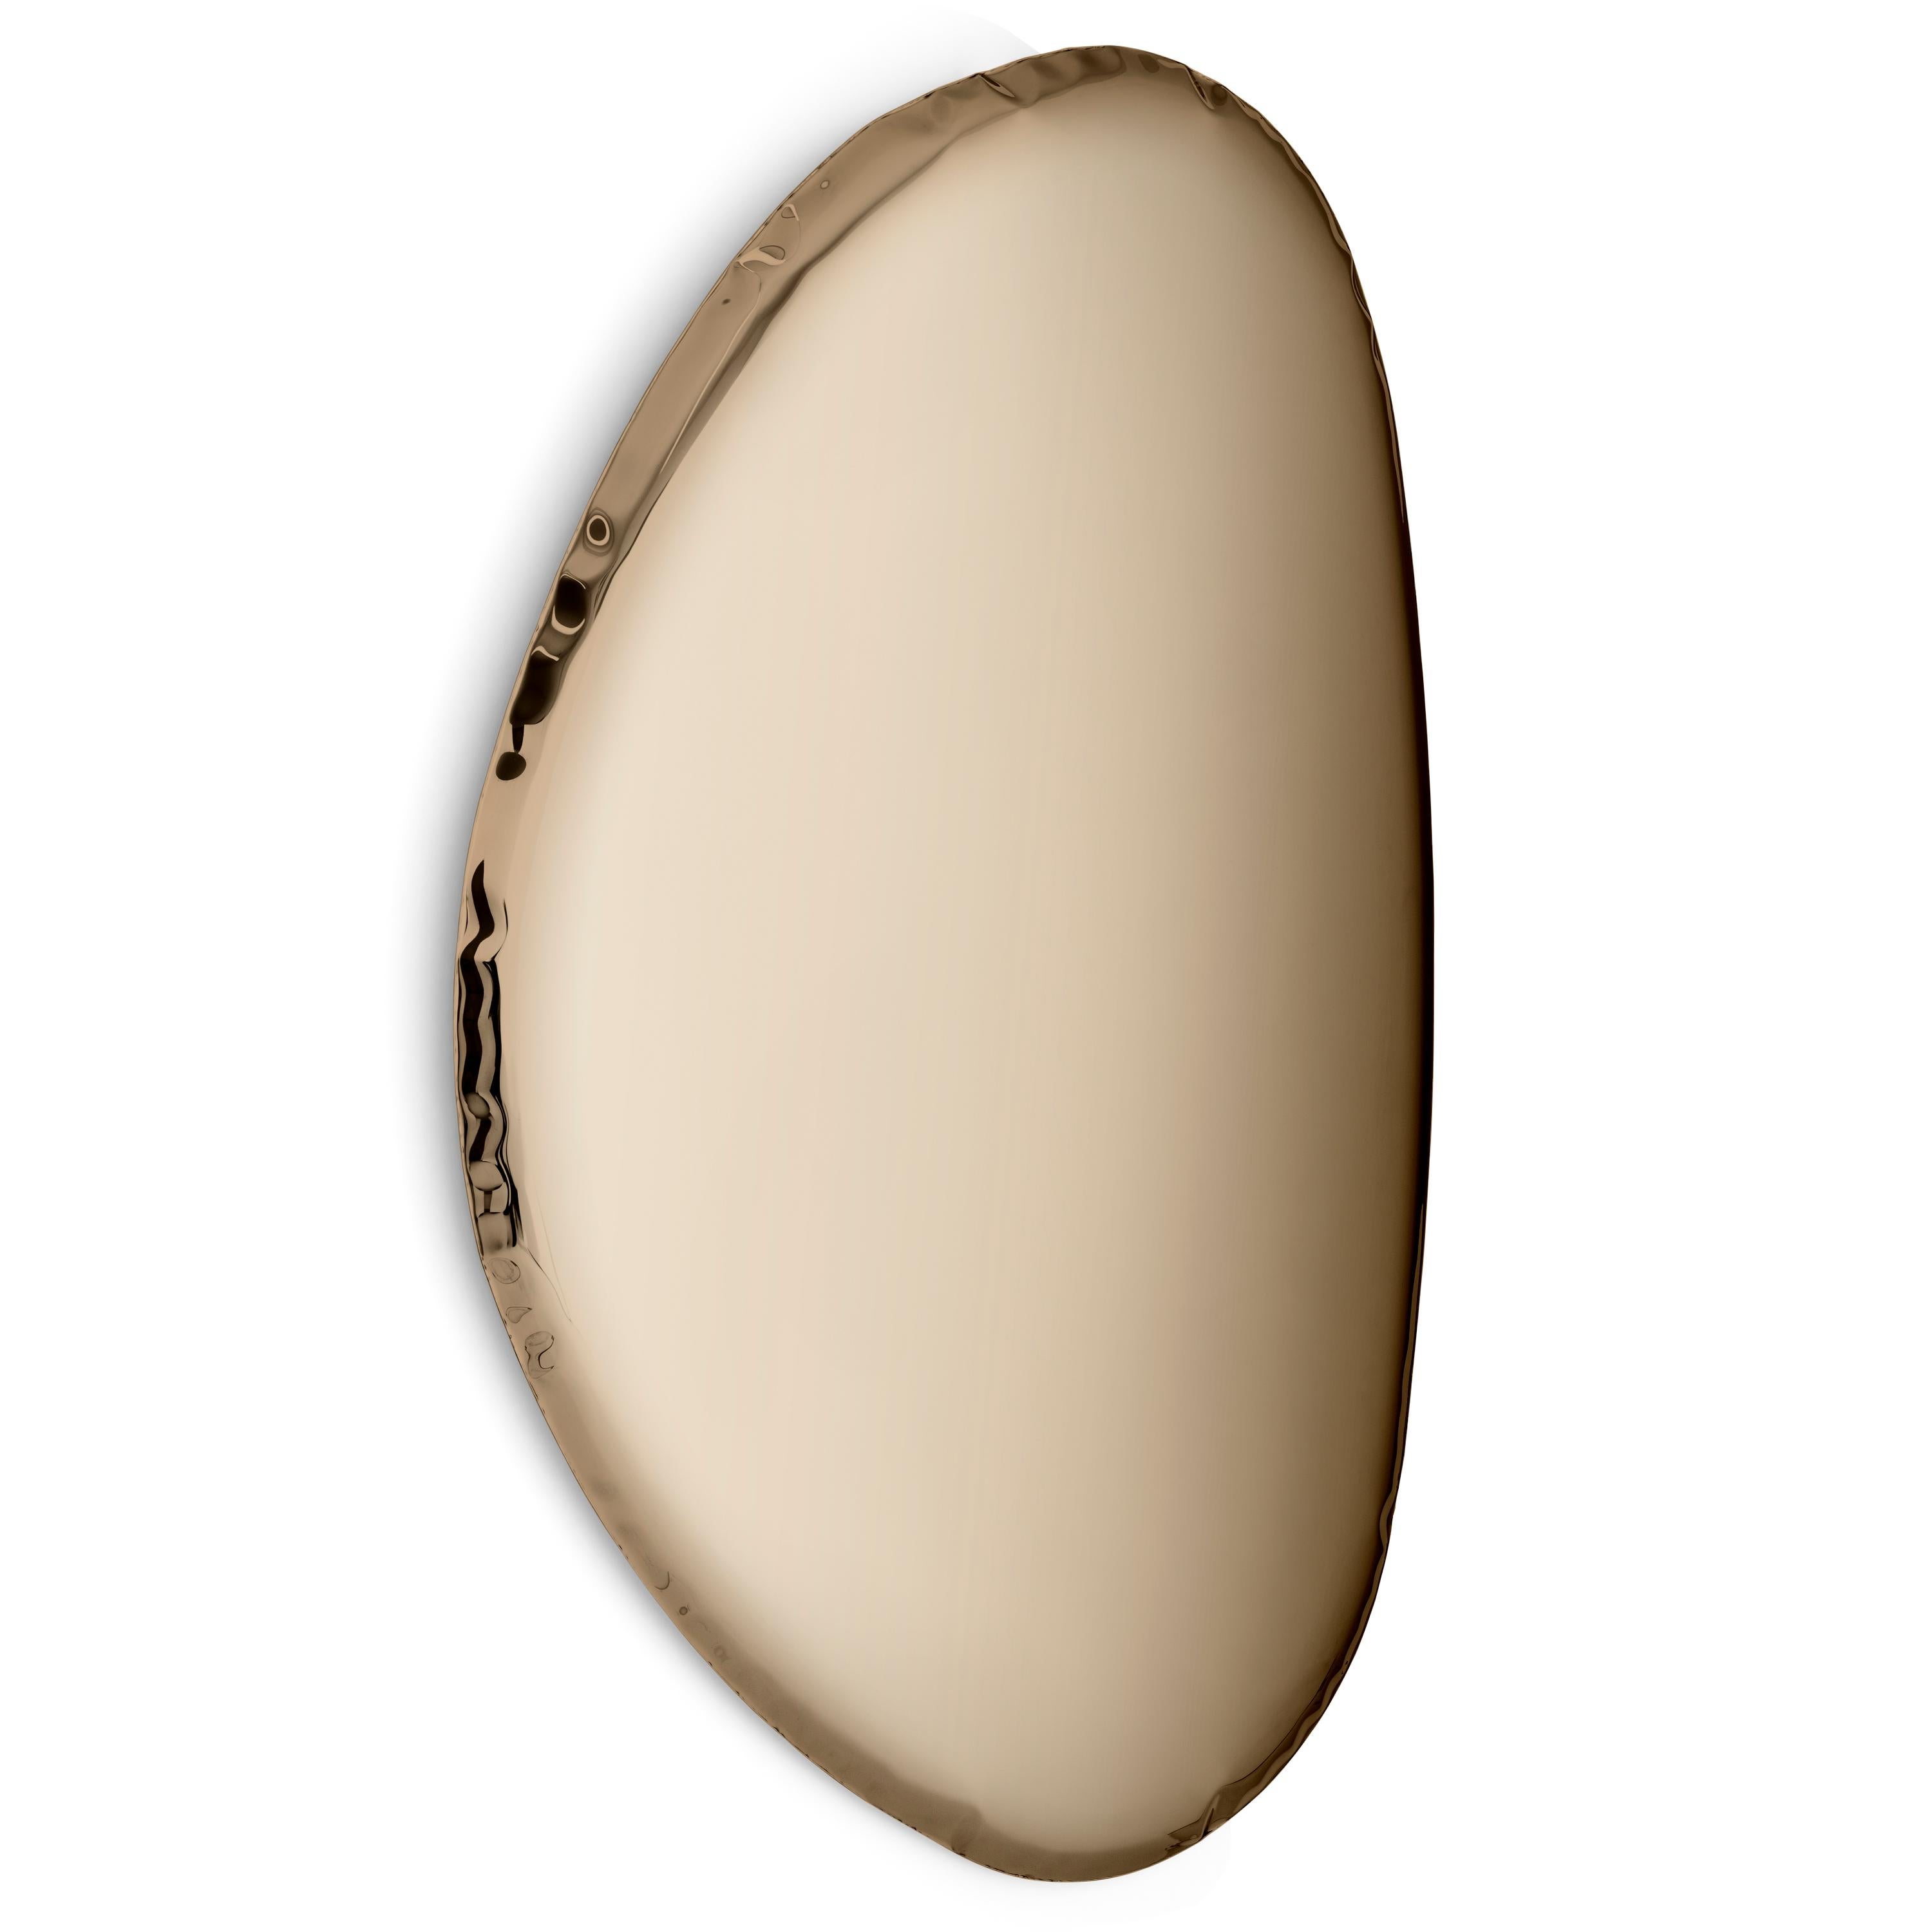 Classic Gold Tafla O2 wall mirror by Zieta
Dimensions: D 6 x W 97 x H 150 cm 
Material: Stainless steel.
Finish: Classic gold.
Available finishes: Stainless steel, white matt, Sapphire/Emerald, Sapphire, Emerald, deep space blue, dark matter, red